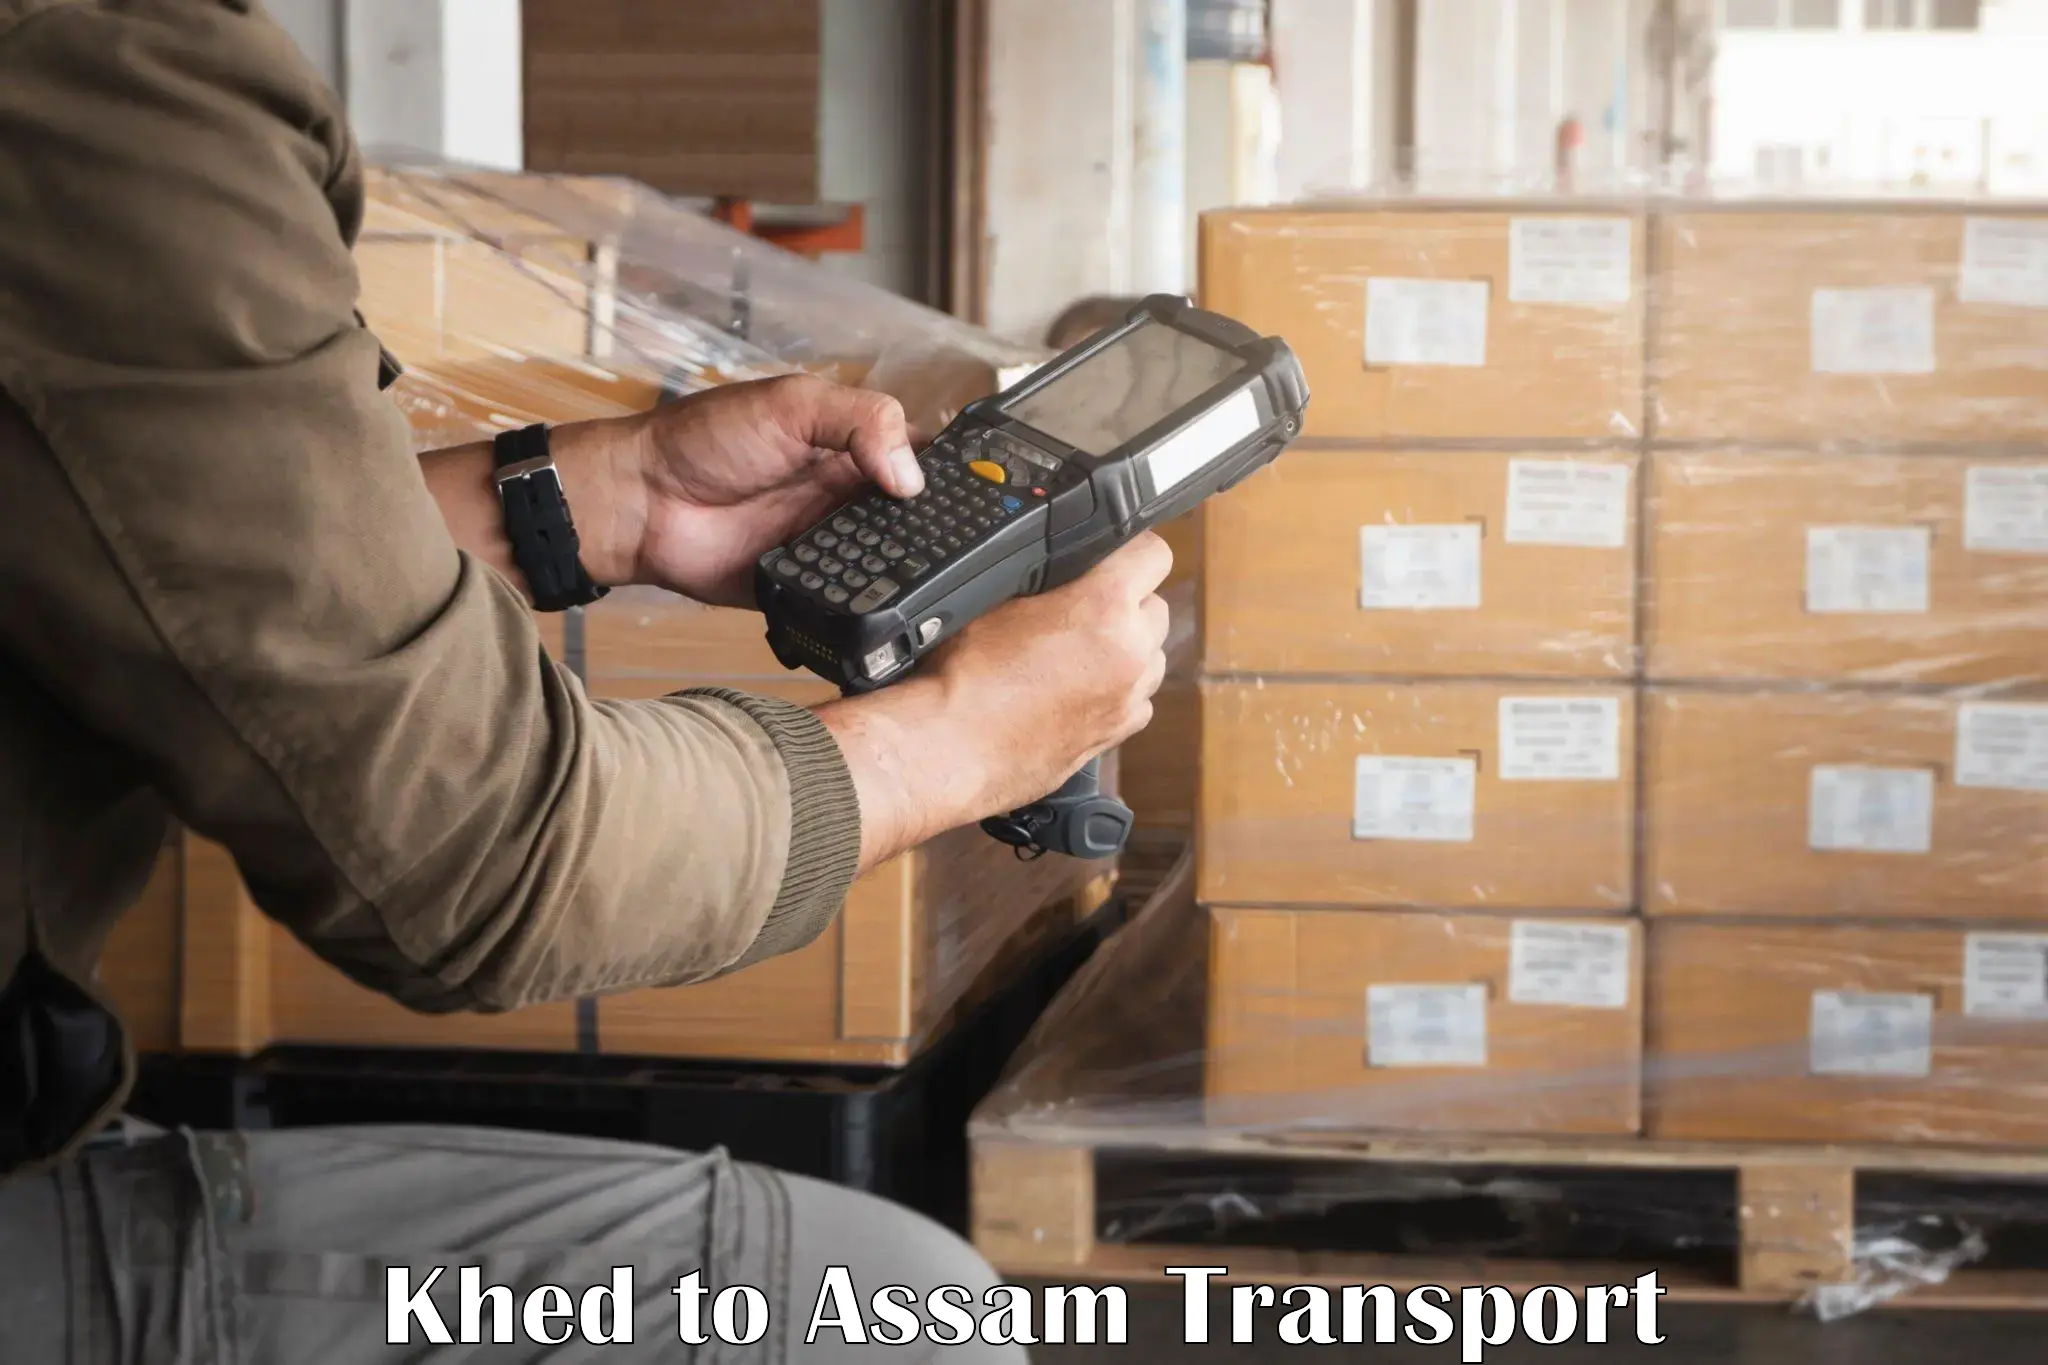 Domestic goods transportation services Khed to Kamrup